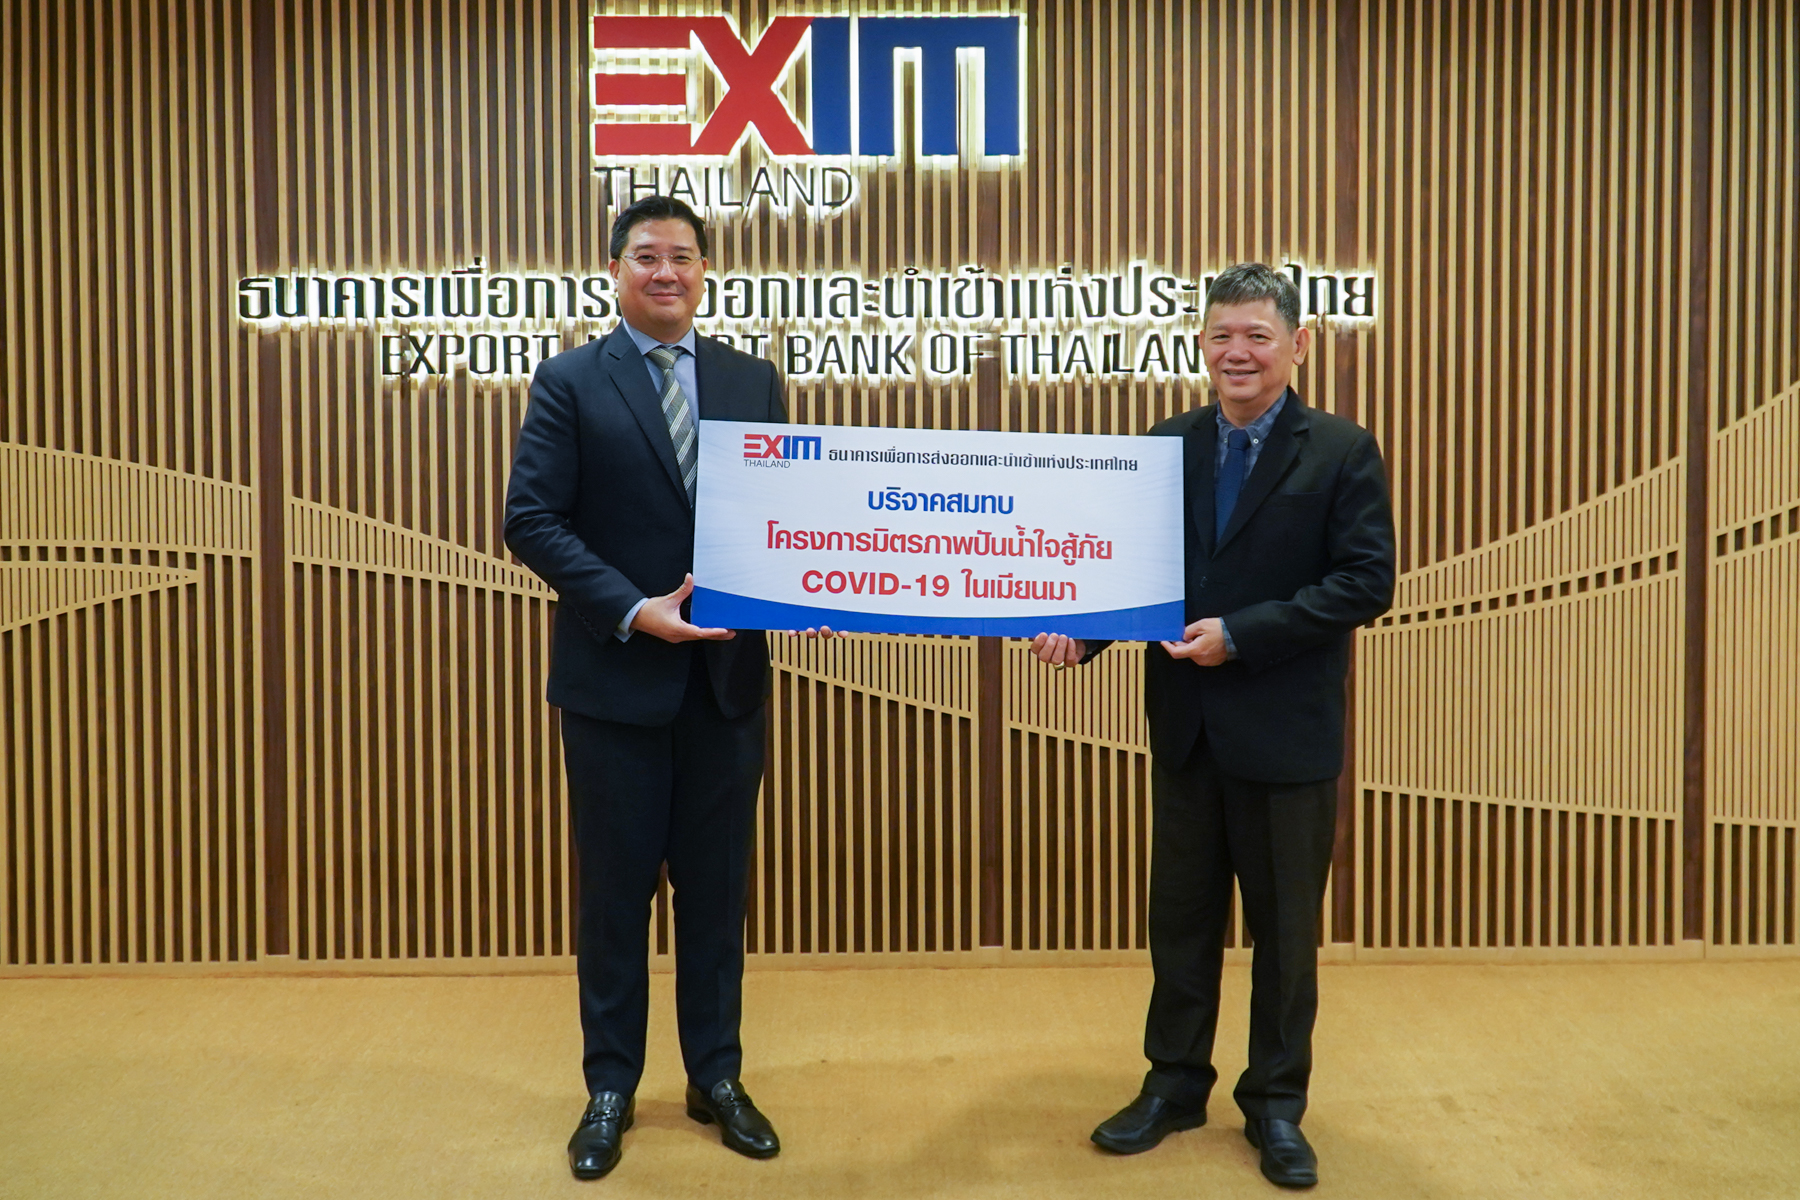 EXIM Thailand Supports Supplies to Fight against COVID-19 in Myanmar  via Thai-Myanmar Business Council